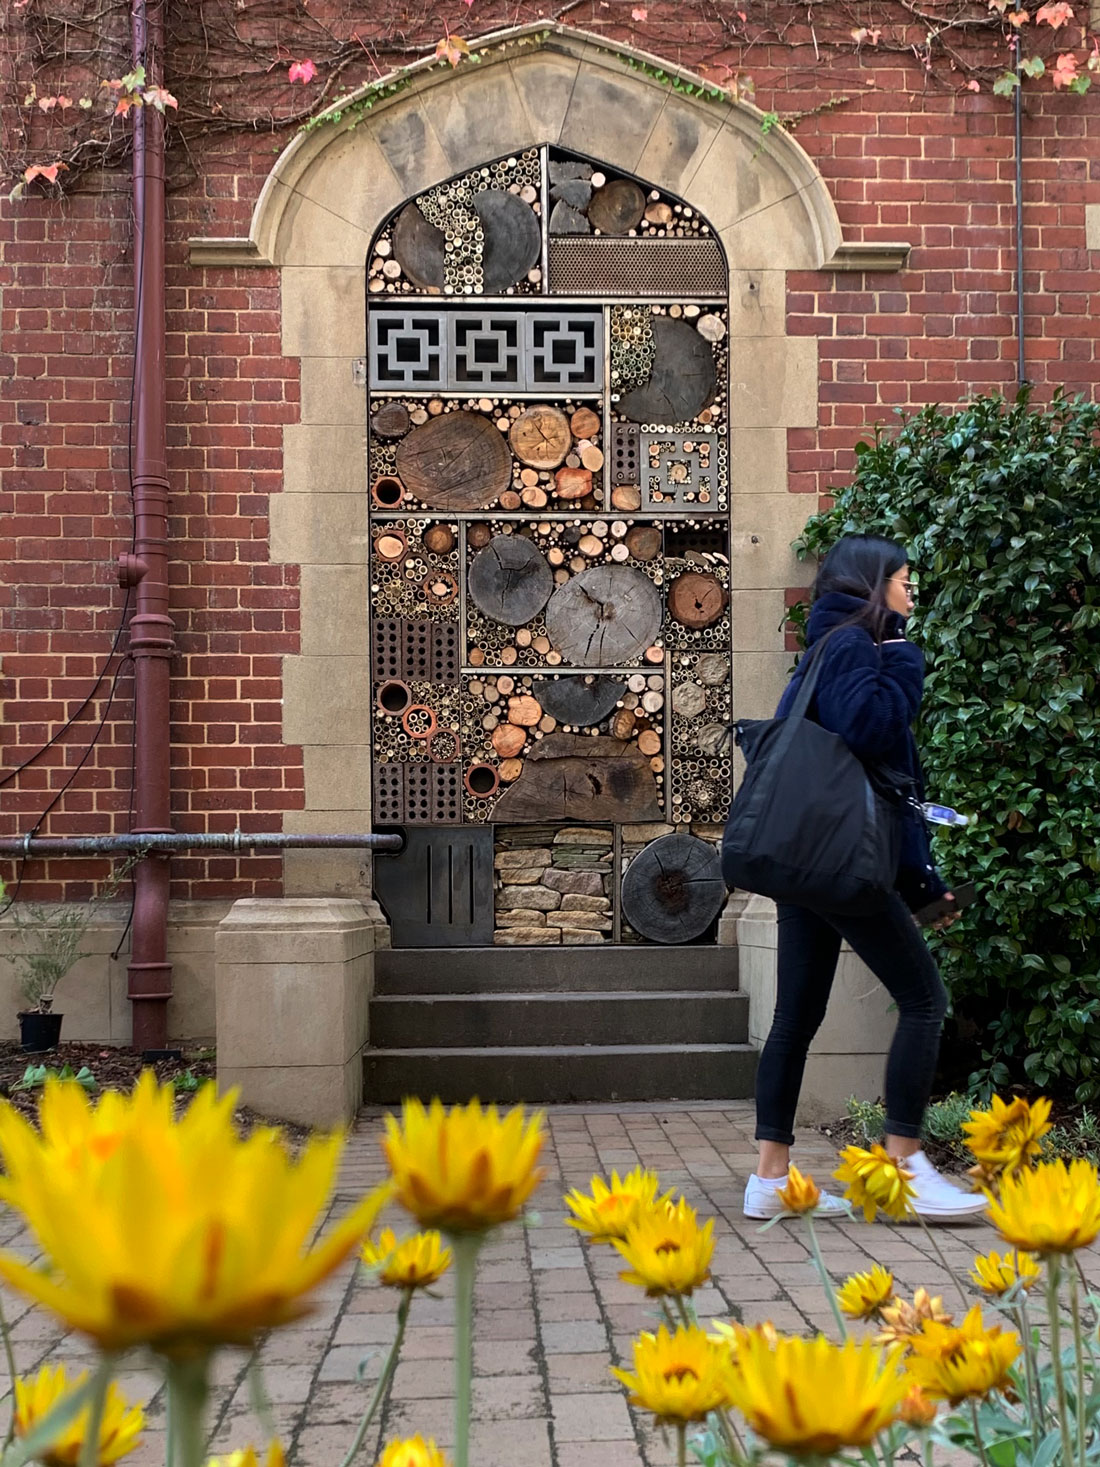 Photo of a brick doorway filled with logs, ends of bamboo, bricks and smaller branches. A woman is pictured having just walked past and there are yellow flowers in the foreground.